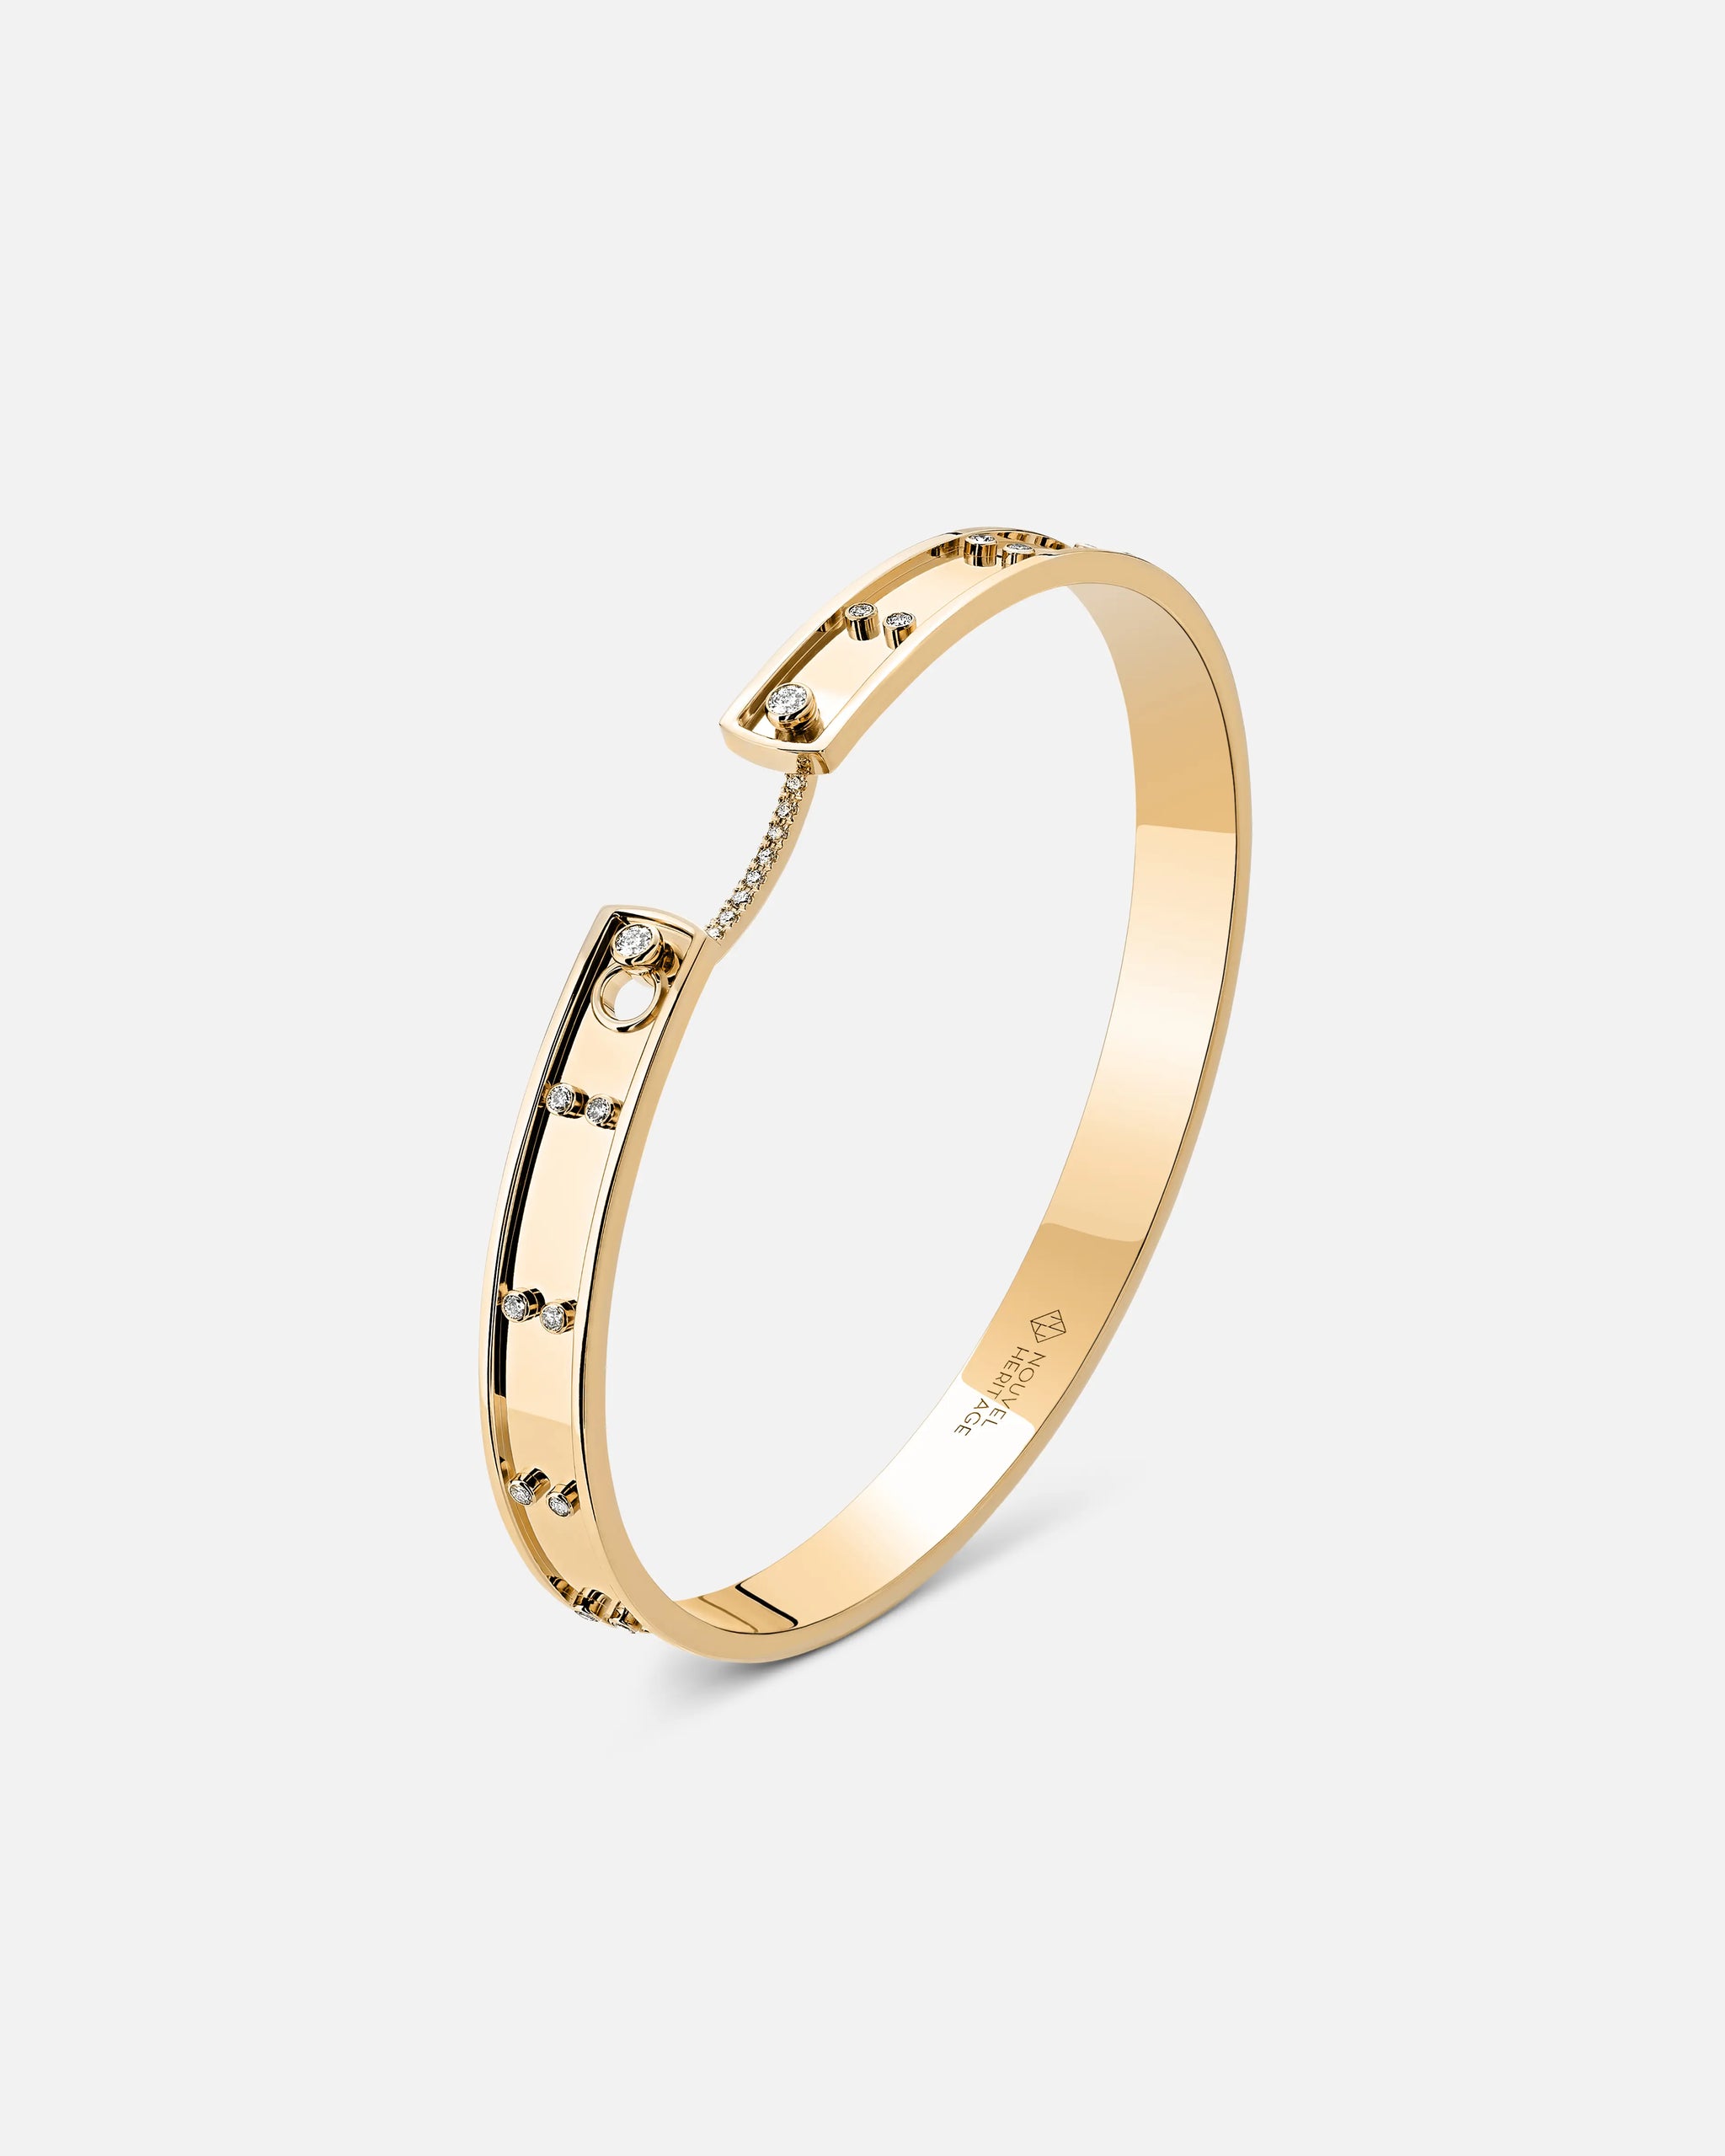 Picnic in Paris Mood Bangle in Yellow Gold - 1 - Nouvel Heritage